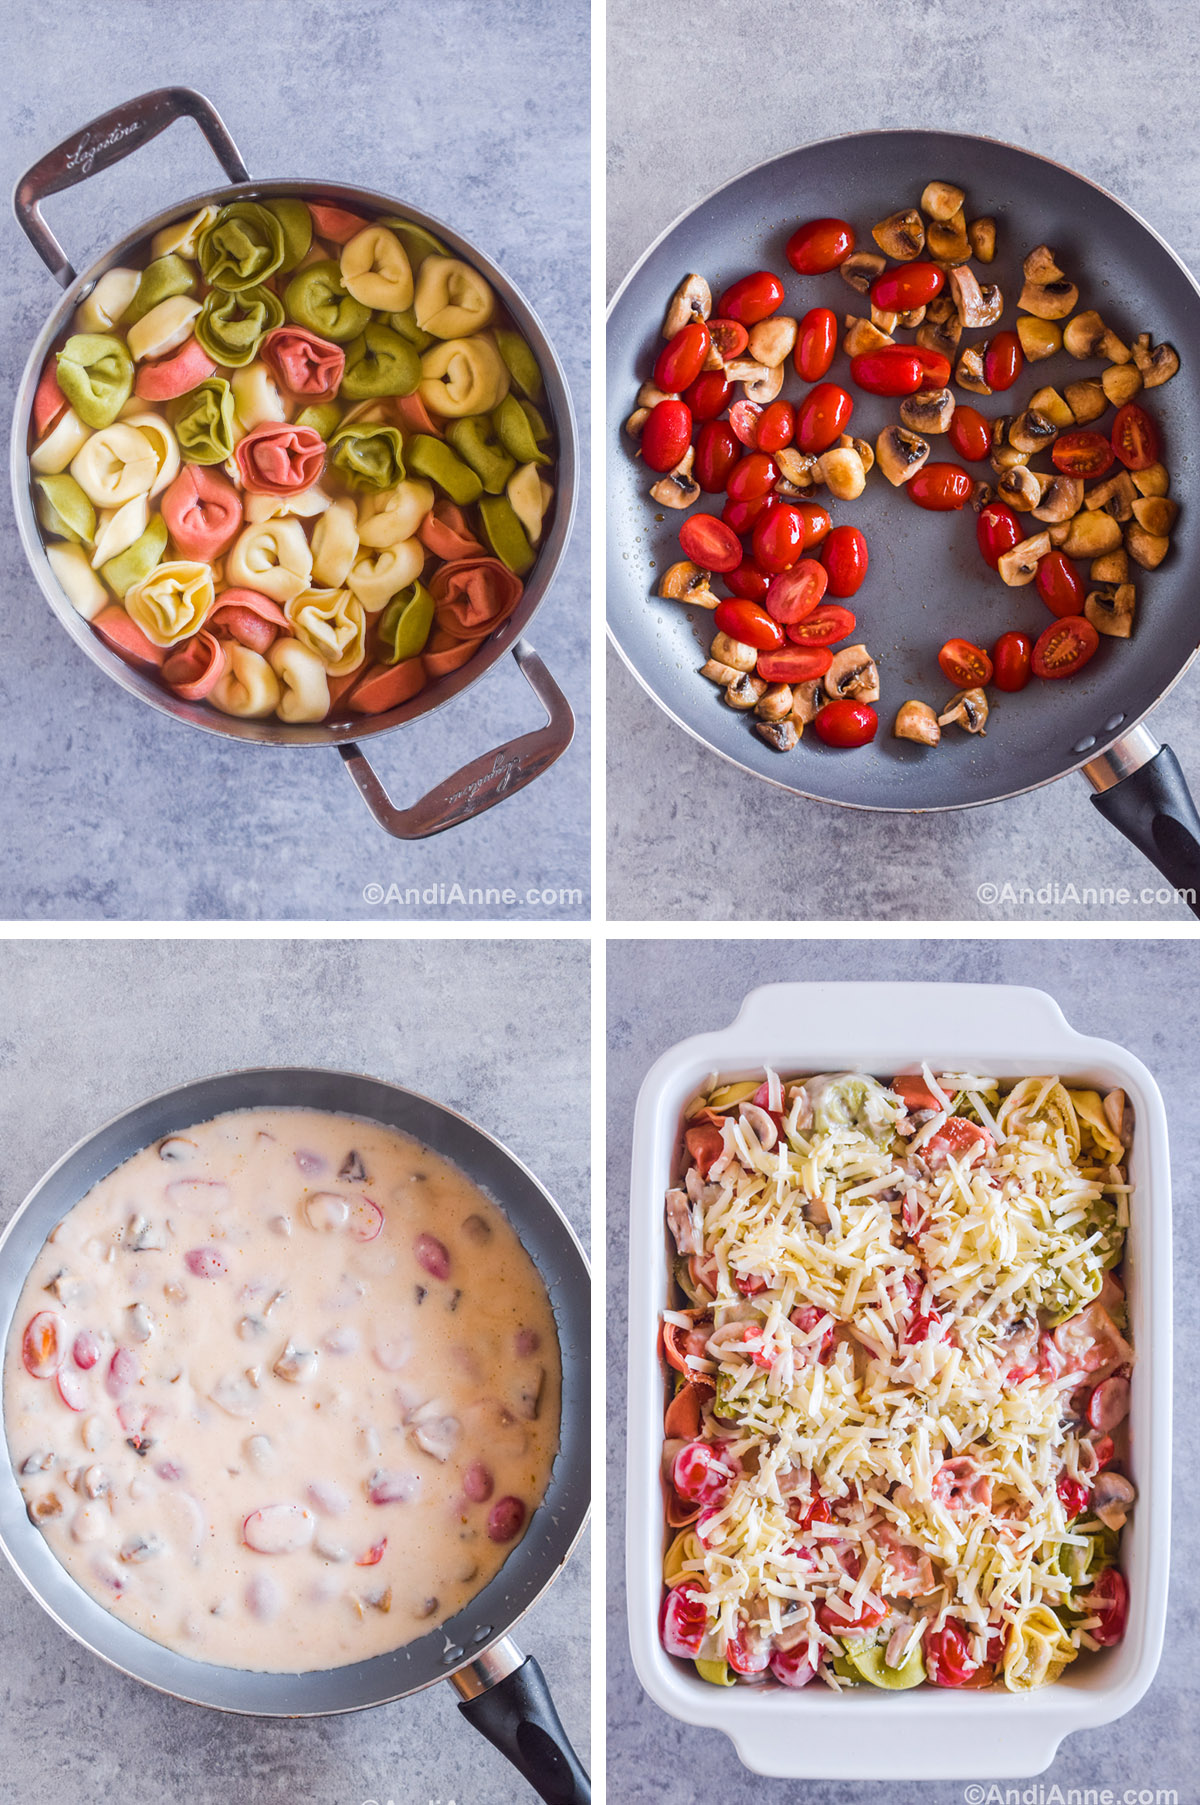 Four images showing steps to make the recipe. First is cooked tortellini in a pot. Second is sliced mushrooms and tomatoes in a frying pan. Third is creamy sauce with mushrooms and tomatoes. Fourth is pasta in a casserole dish sprinkled with mozzarella cheese.